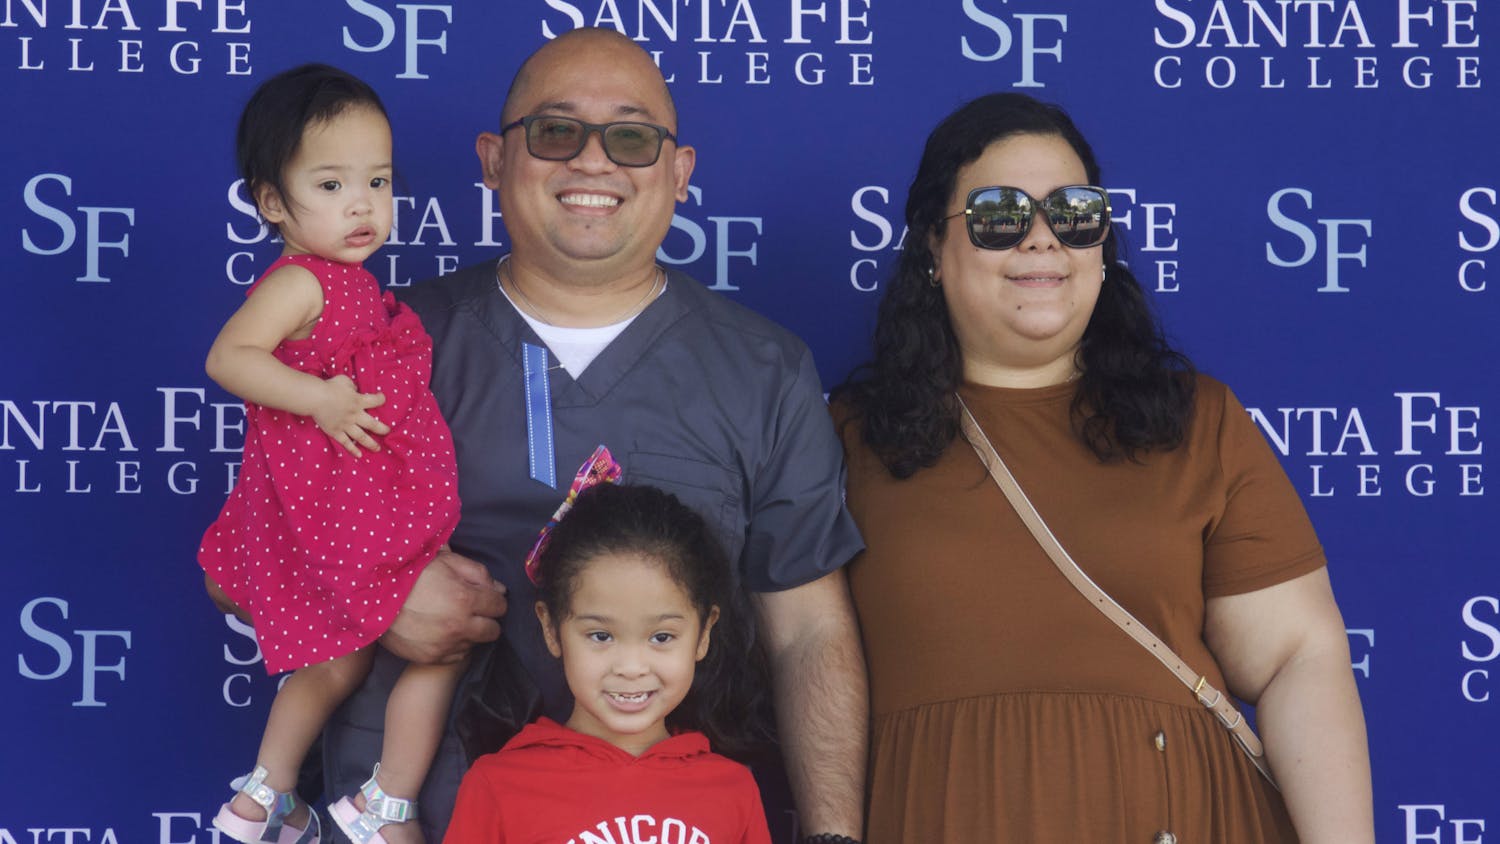 Shariff Manlosa (second from the left) stands on the graduation stage at Santa Fe College's Drive-Thru Grad Walk with his daughters, Monina (left) and Sofia (third from the left), and his wife, Margarita (right) on Thursday, April 29, 2021.